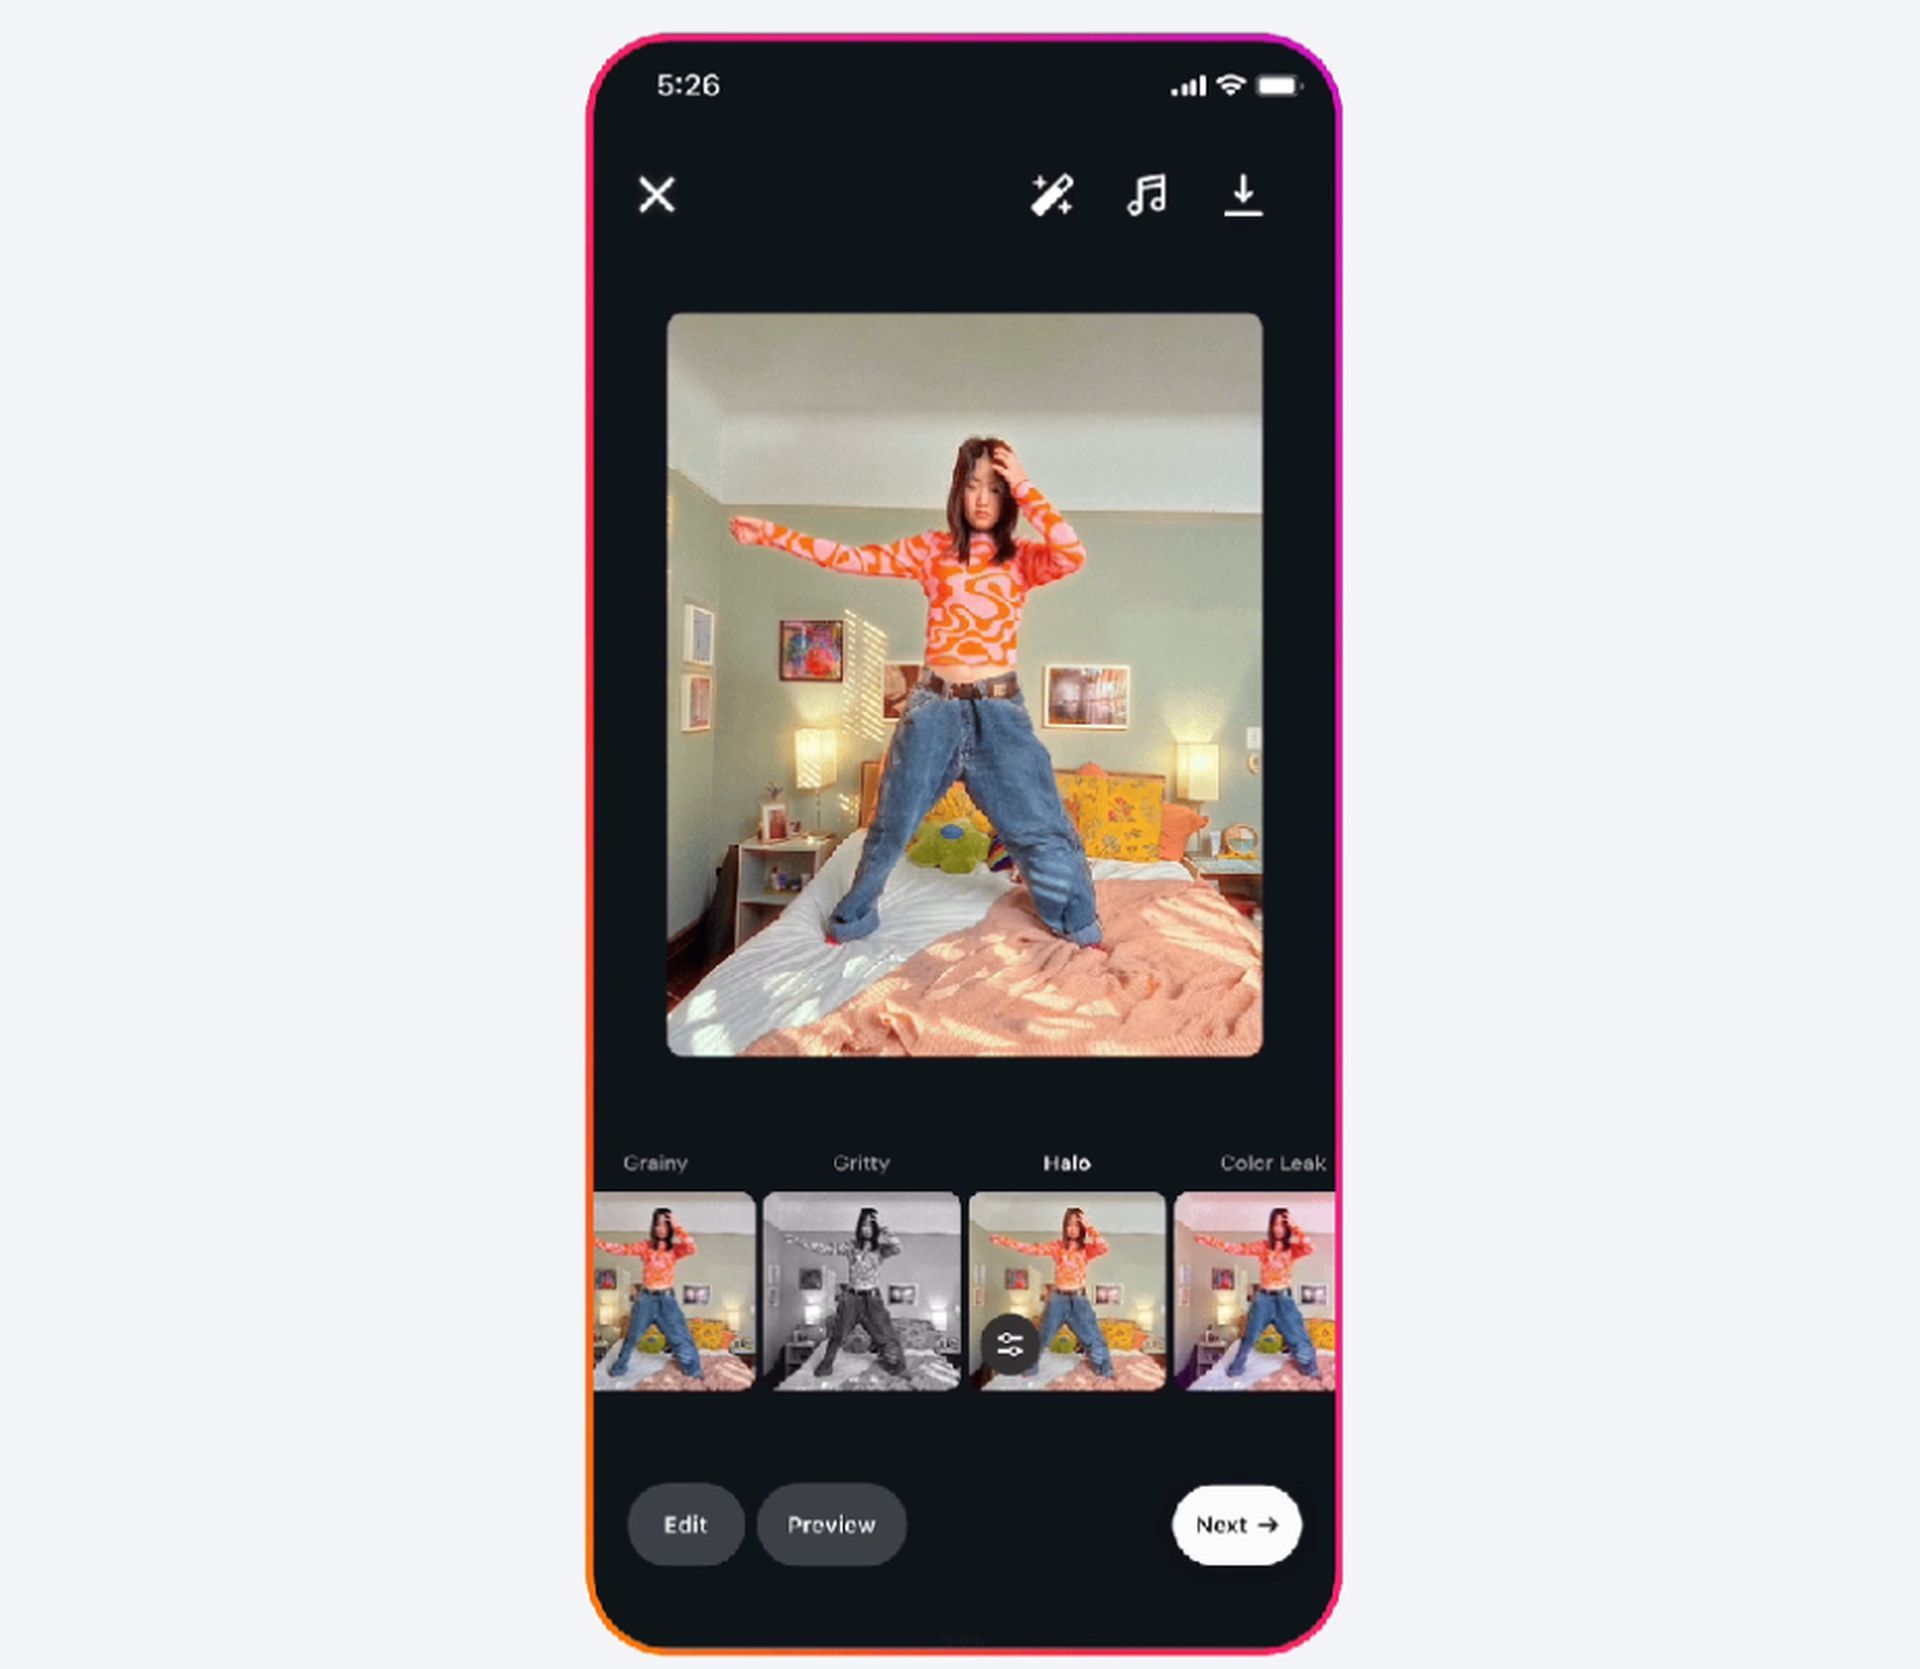 Instagram unveils exciting creation tools for Reels and Stories